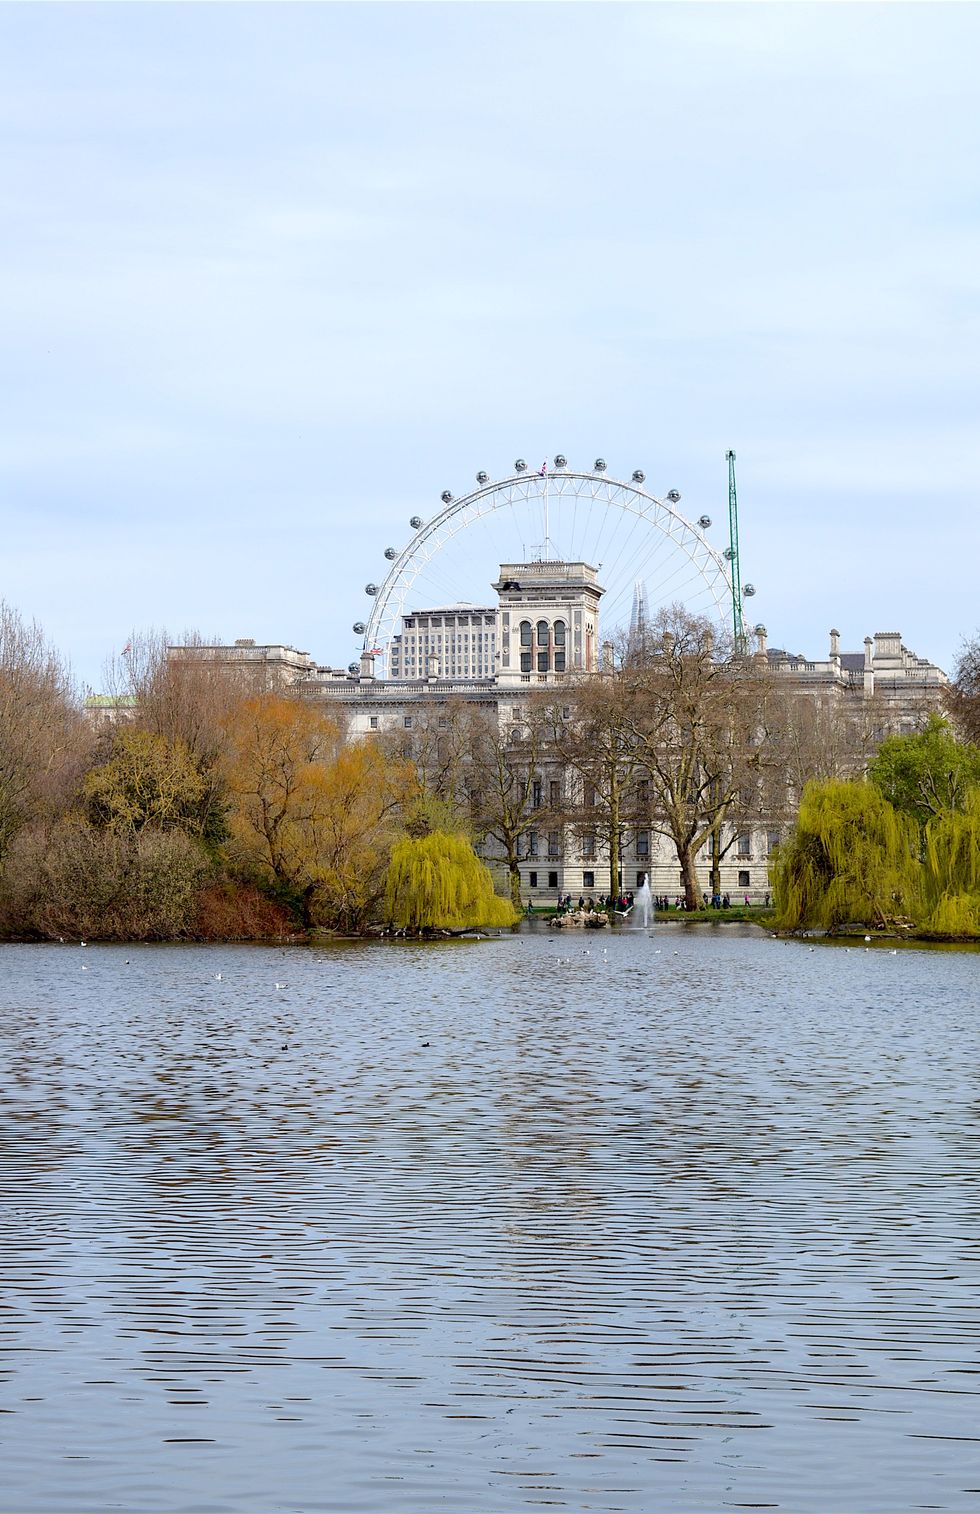 <p>London wouldn't be what it is without its Royal Parks. St James's Park is perfect for a Sunday walk, and don't forget to bring some food for the ducks and squirrels–you don't want to disappoint them!  </p>